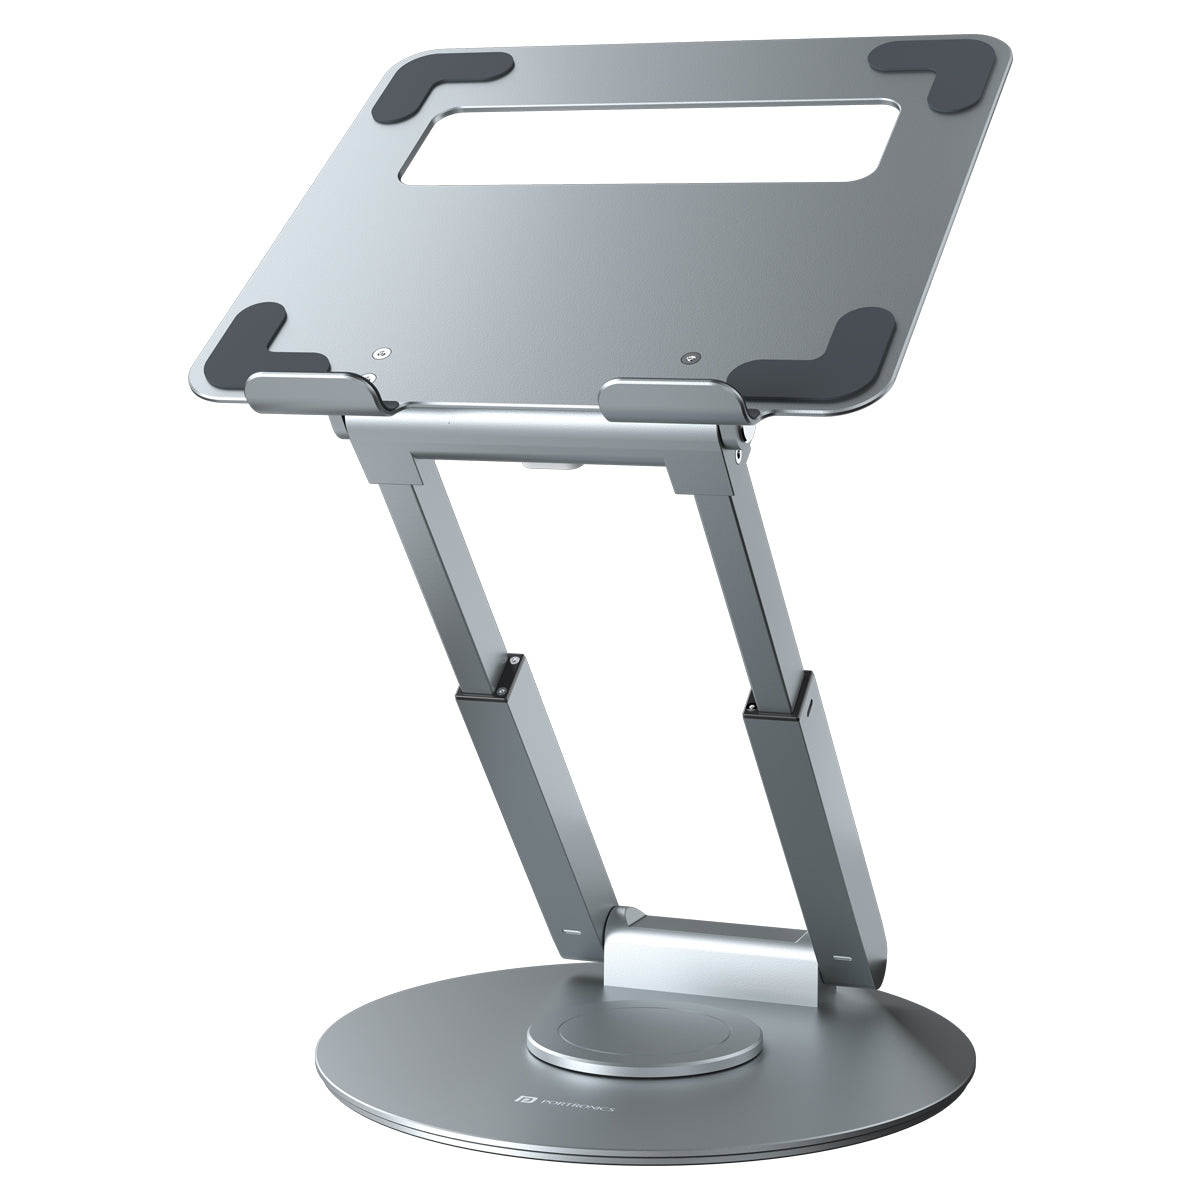 Laptop Stands for Every User: From Portable to Adjustable Designs插图3